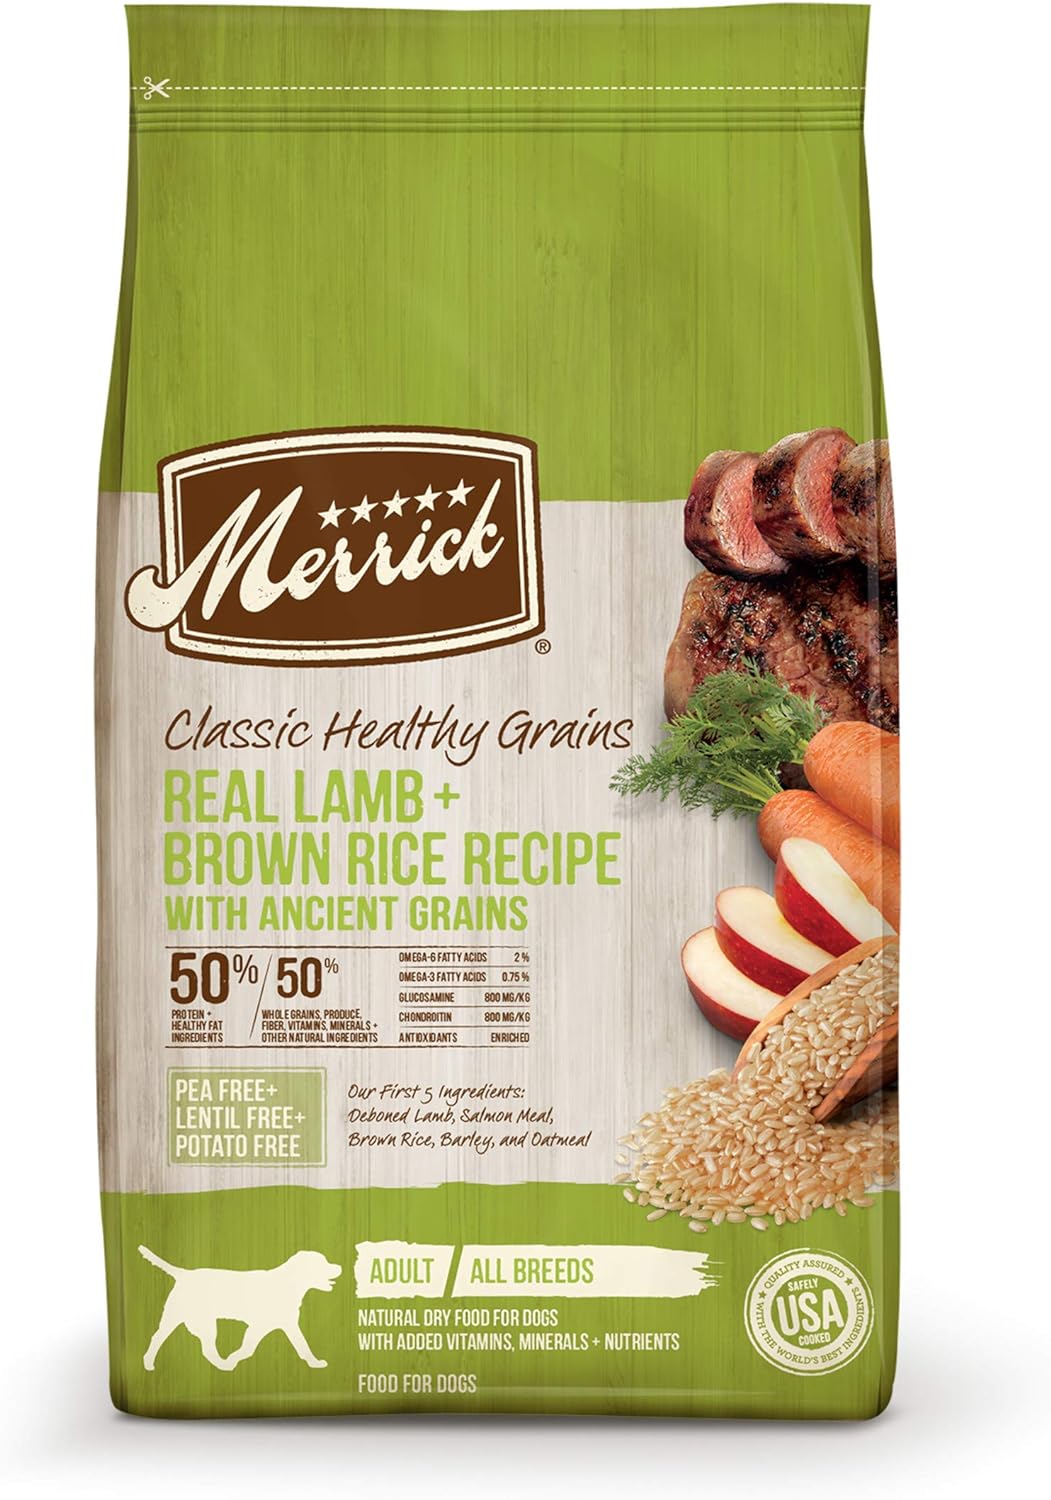 Merrick Lil’ Plates Real Lamb + Brown Rice Recipe with Ancient Grains Dry Dog Food – Gallery Image 1